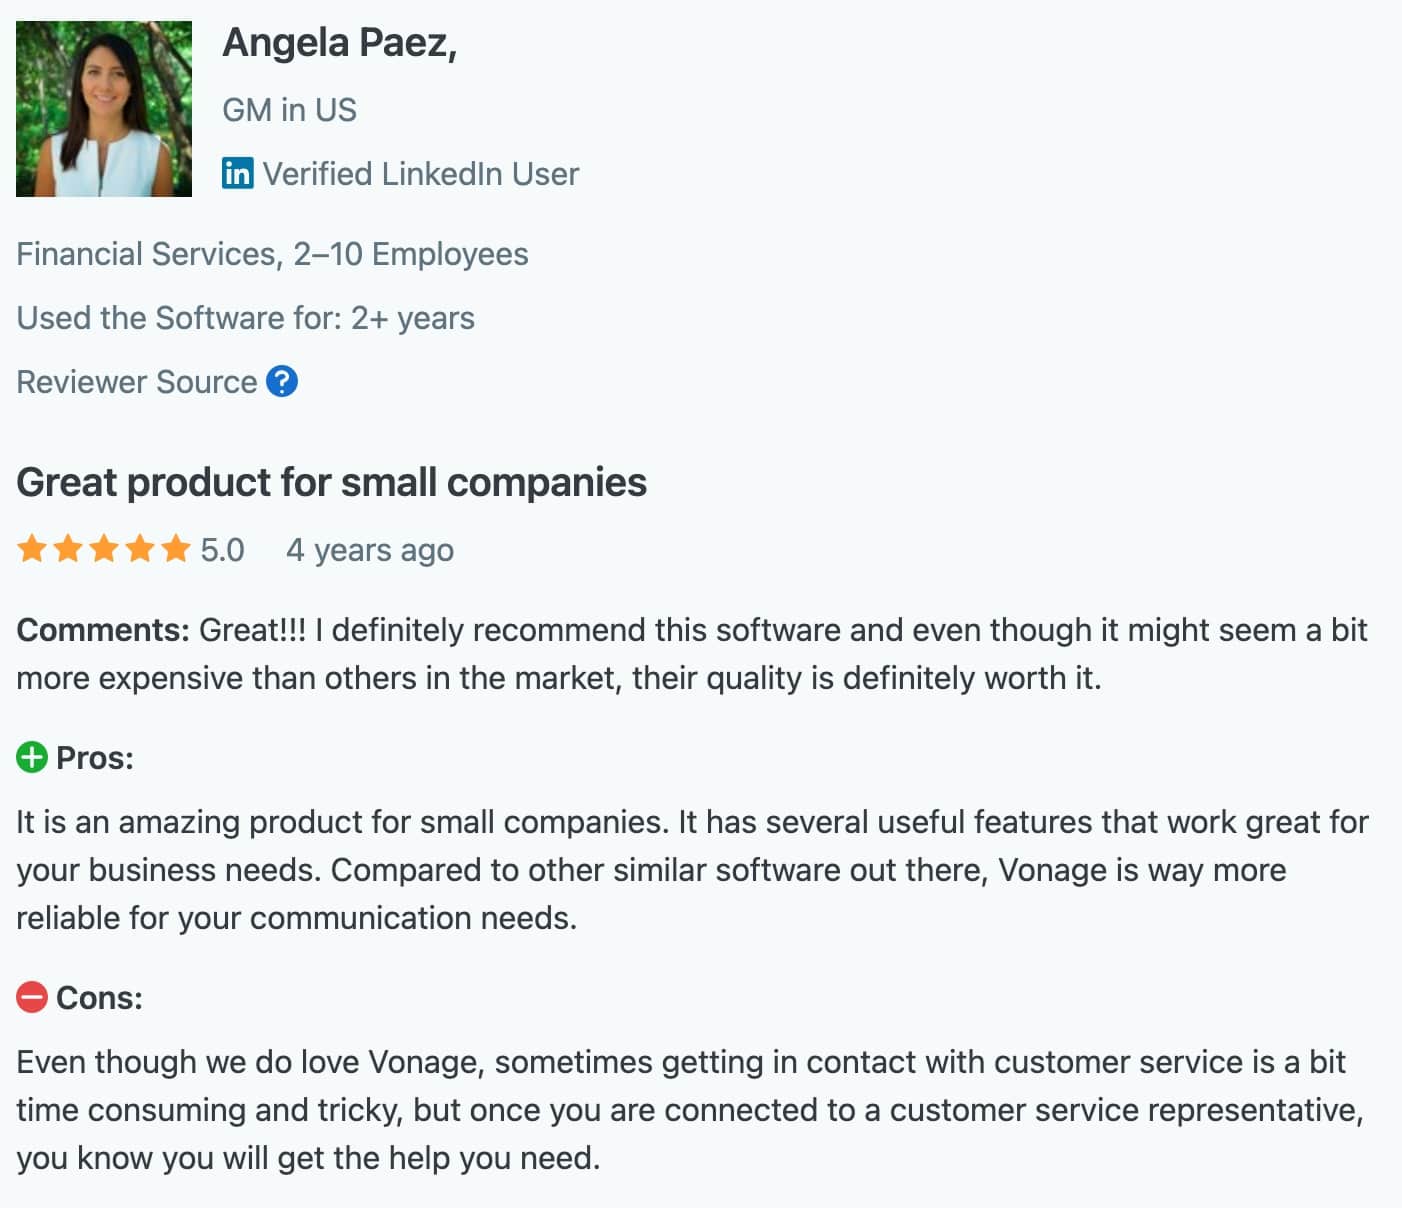 The image shows a review with a 5-star rating on the Capterra site.